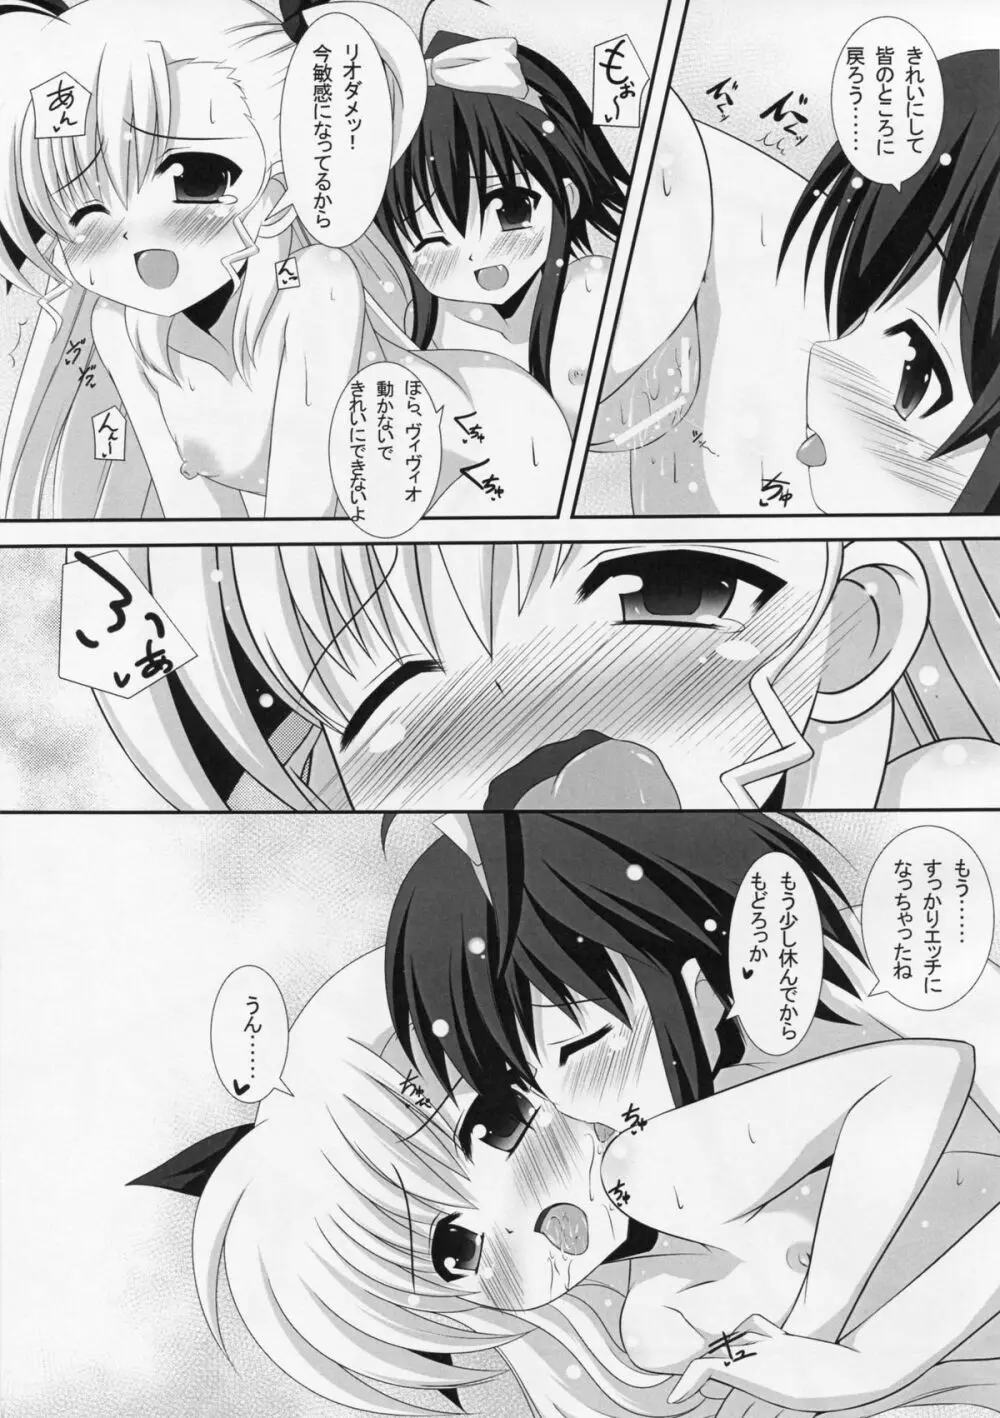 Sexual Drive #02 Page.26